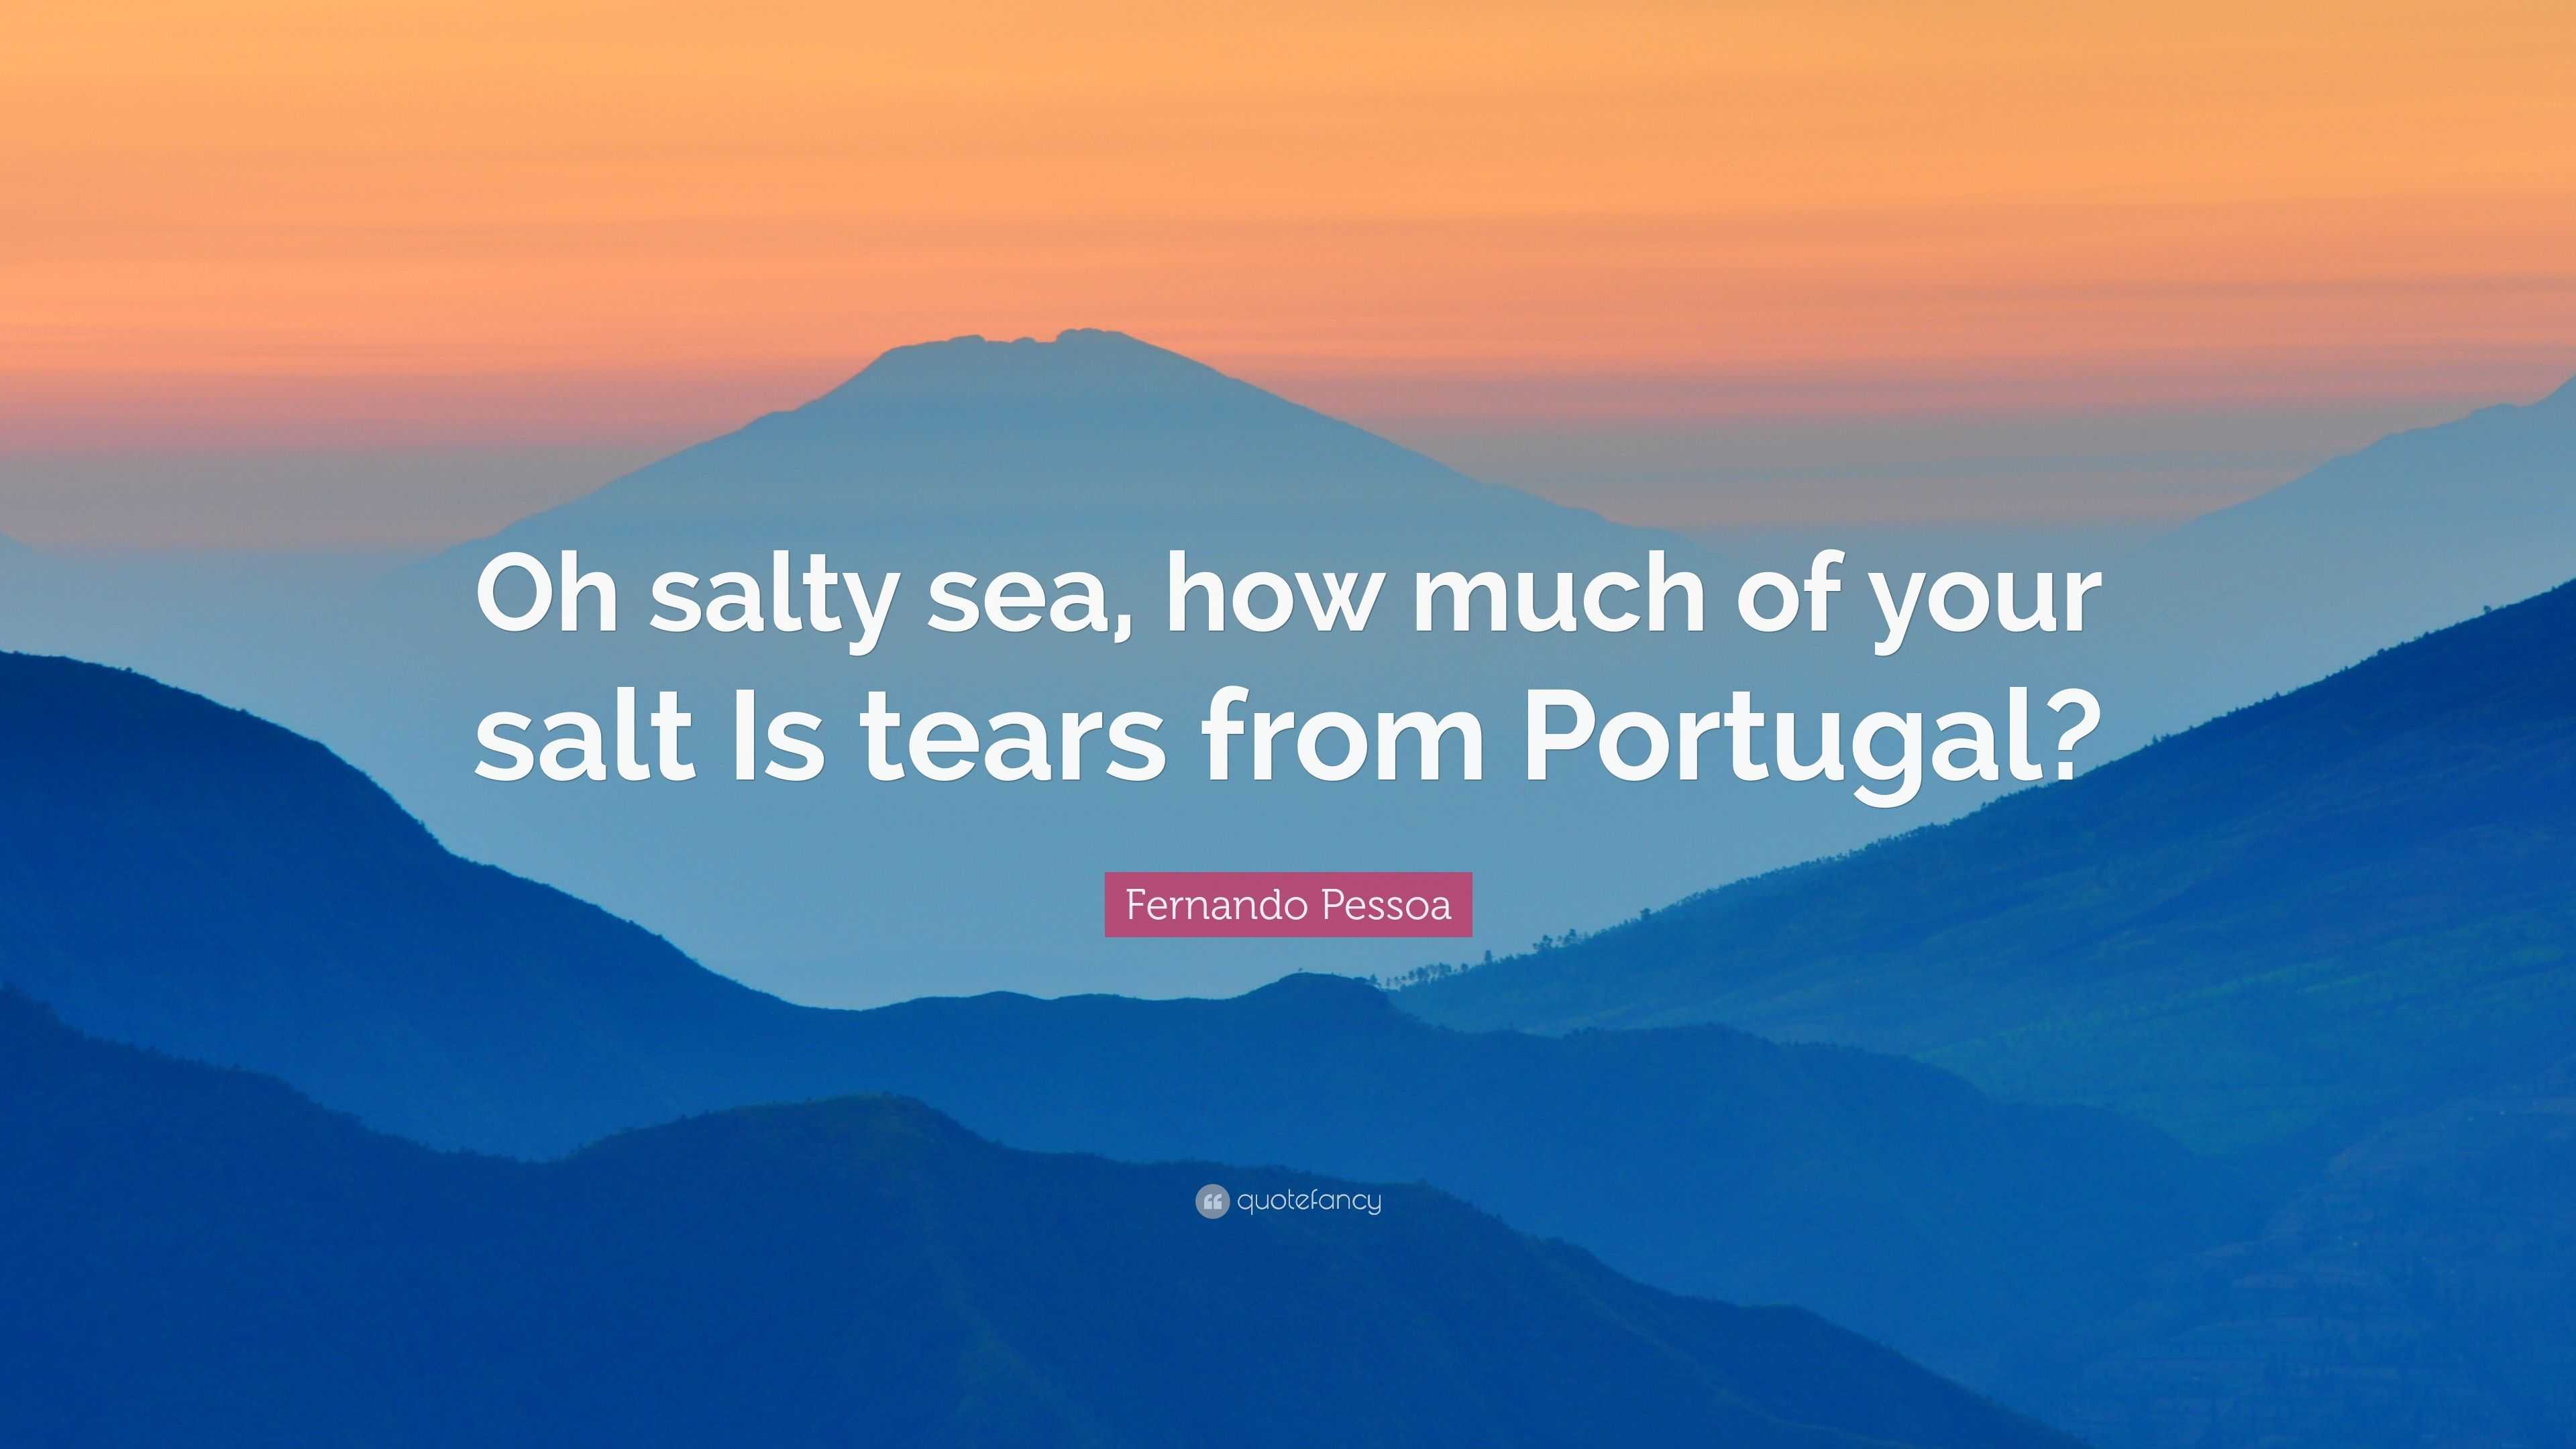 Fernando Pessoa Quote: “Oh salty sea, how much of your salt Is tears